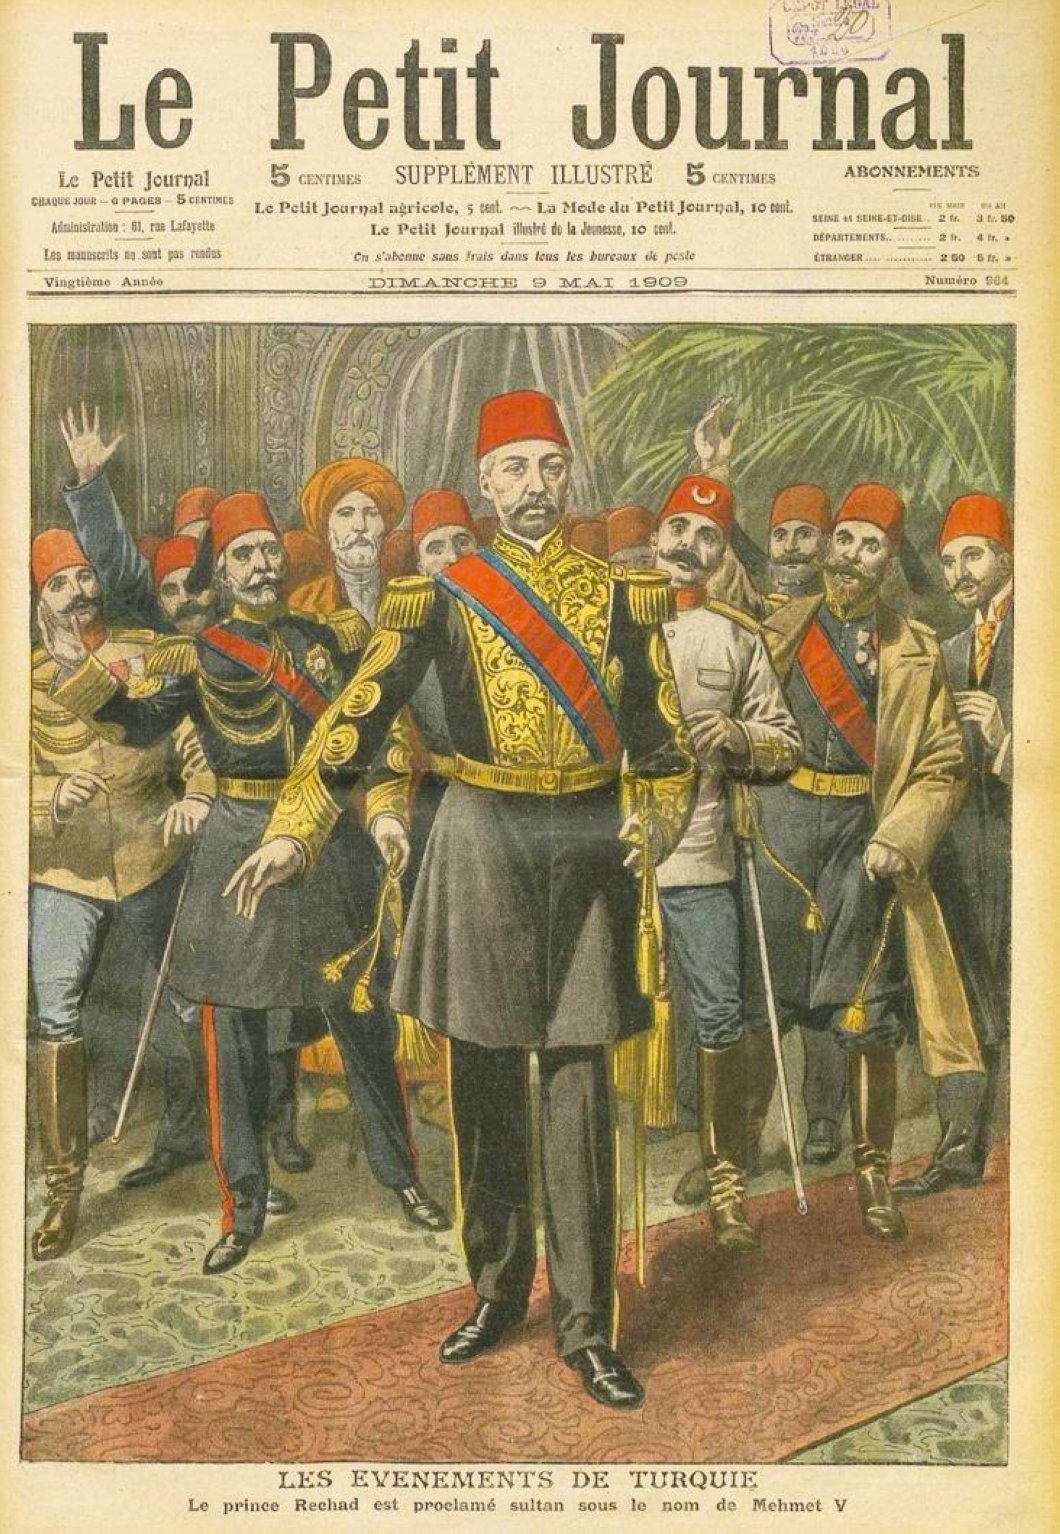 Le Petit Journal's coverage on Mehmed V's proclamation as the sultan. (Wikimedia) 